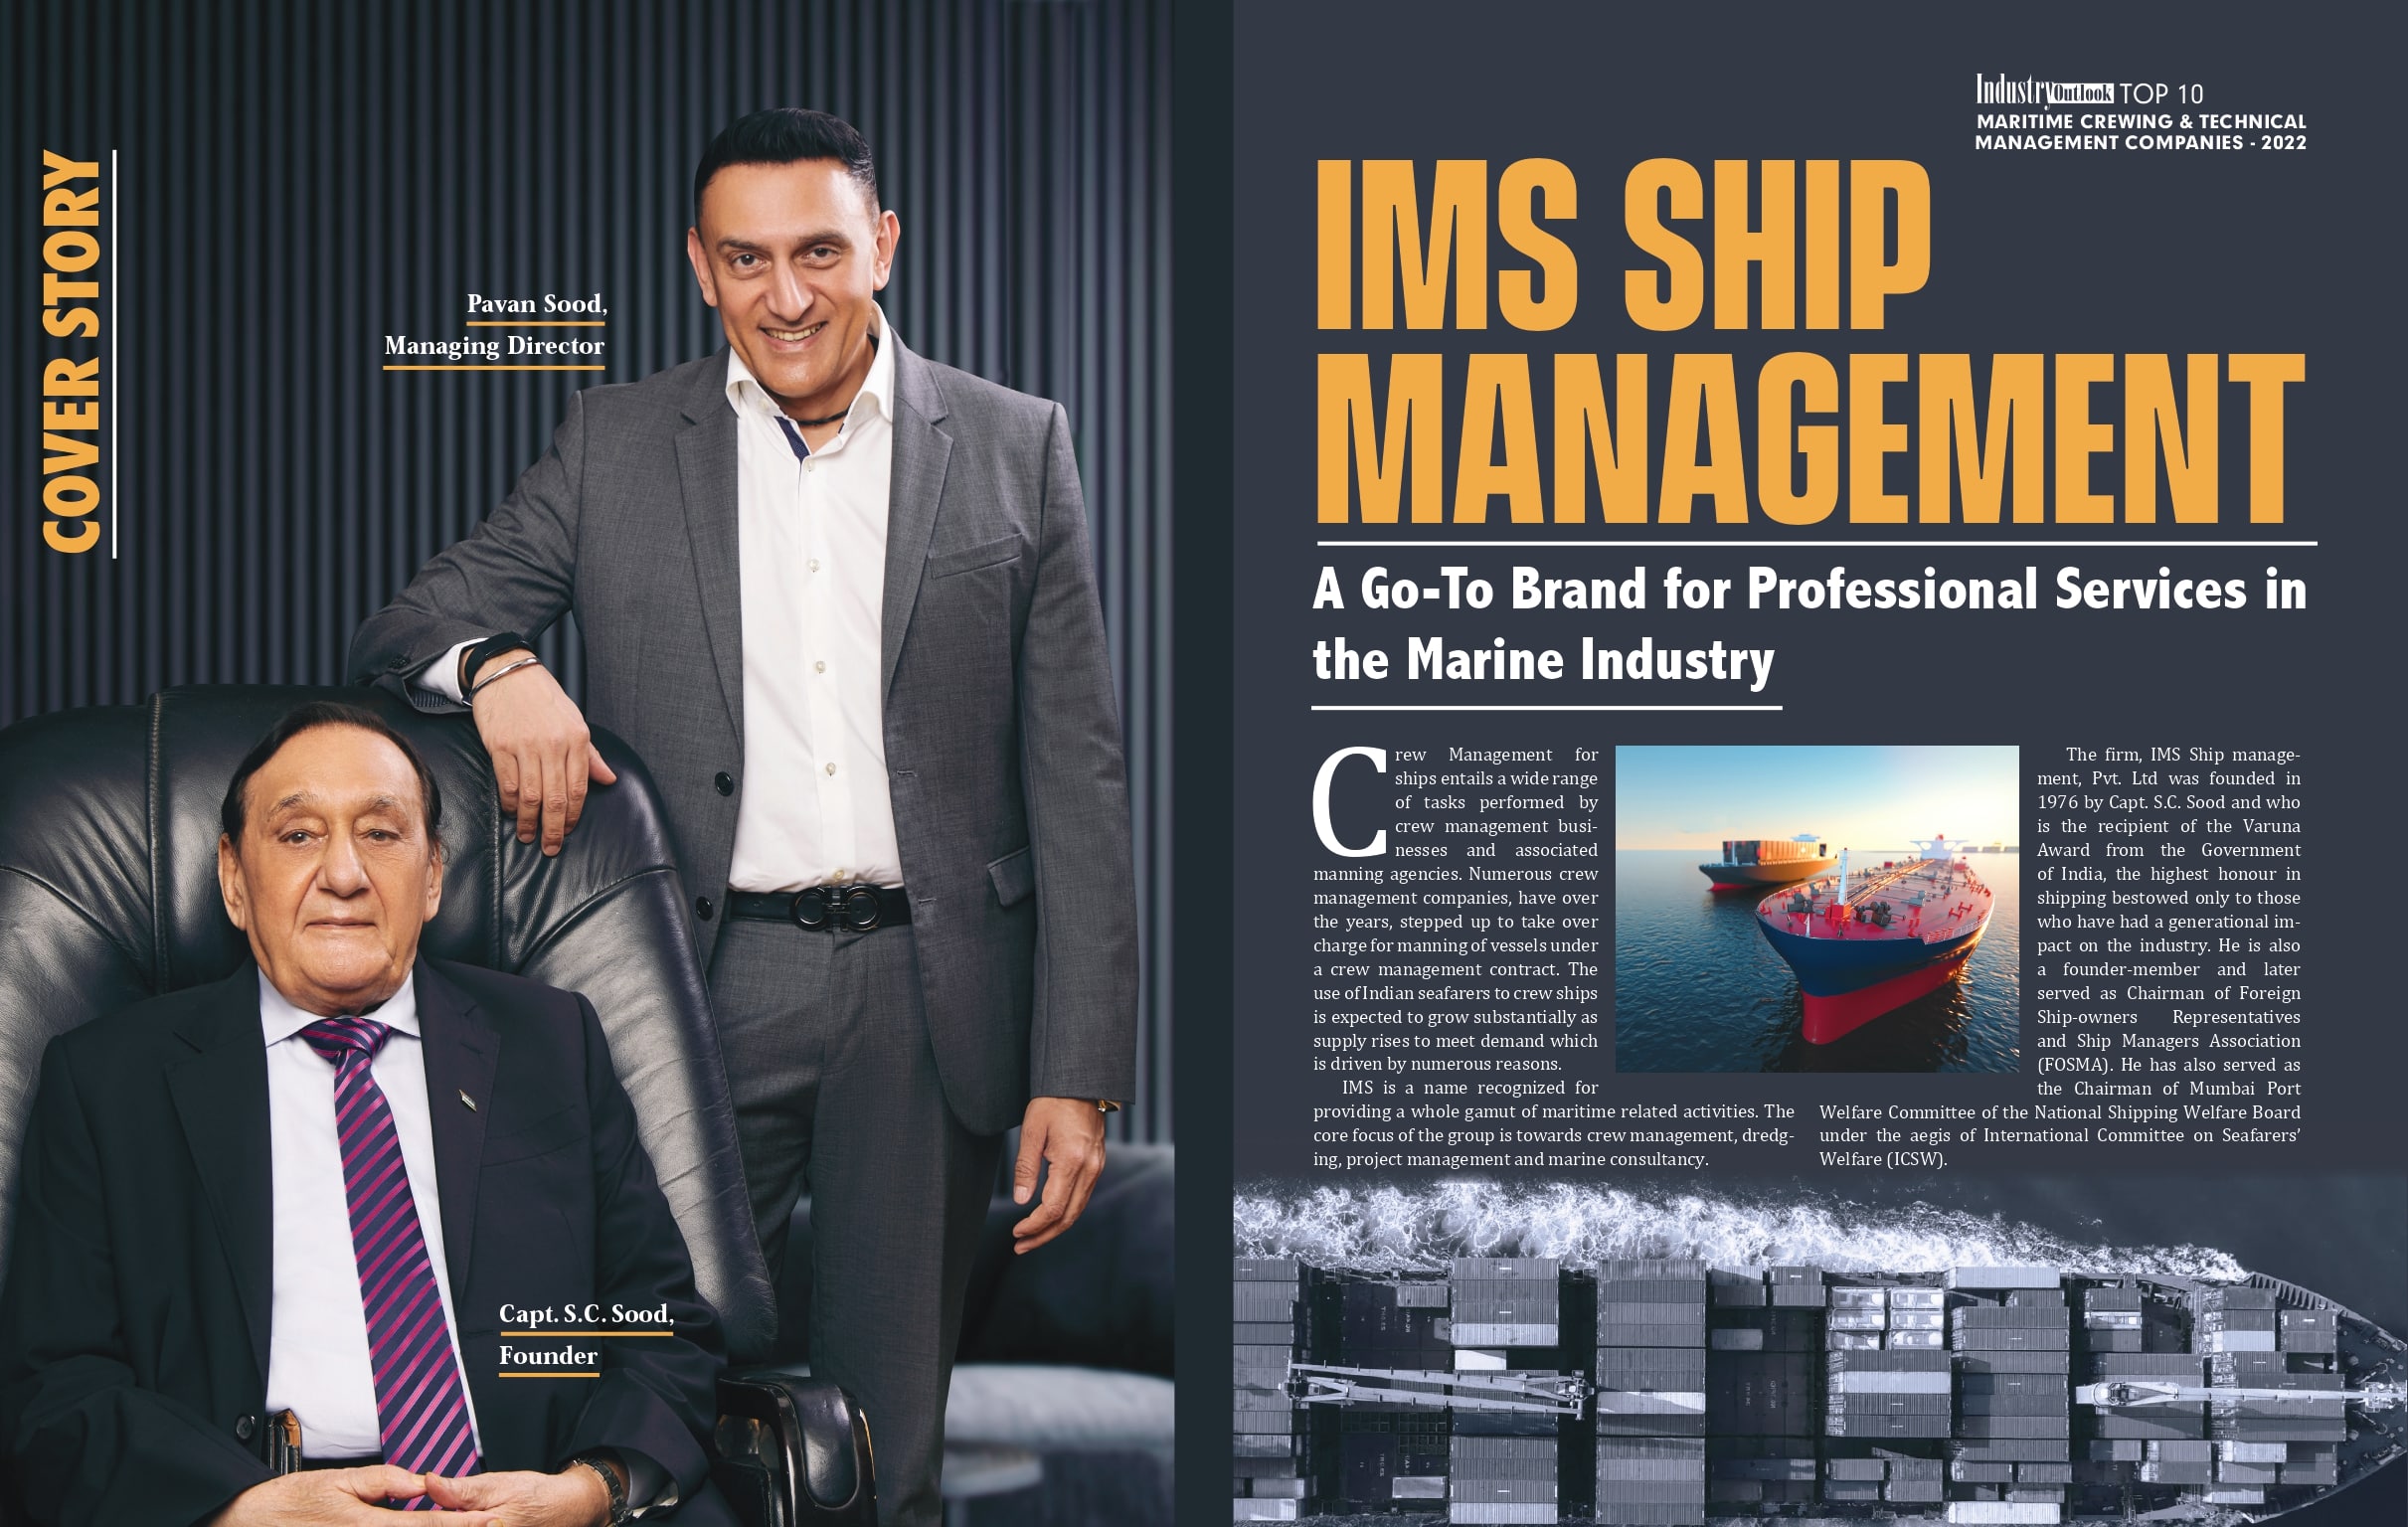 Indrustry Outlook Awards 2022 - One of the Top 10 Maritime Crewing & Technical Management Companies